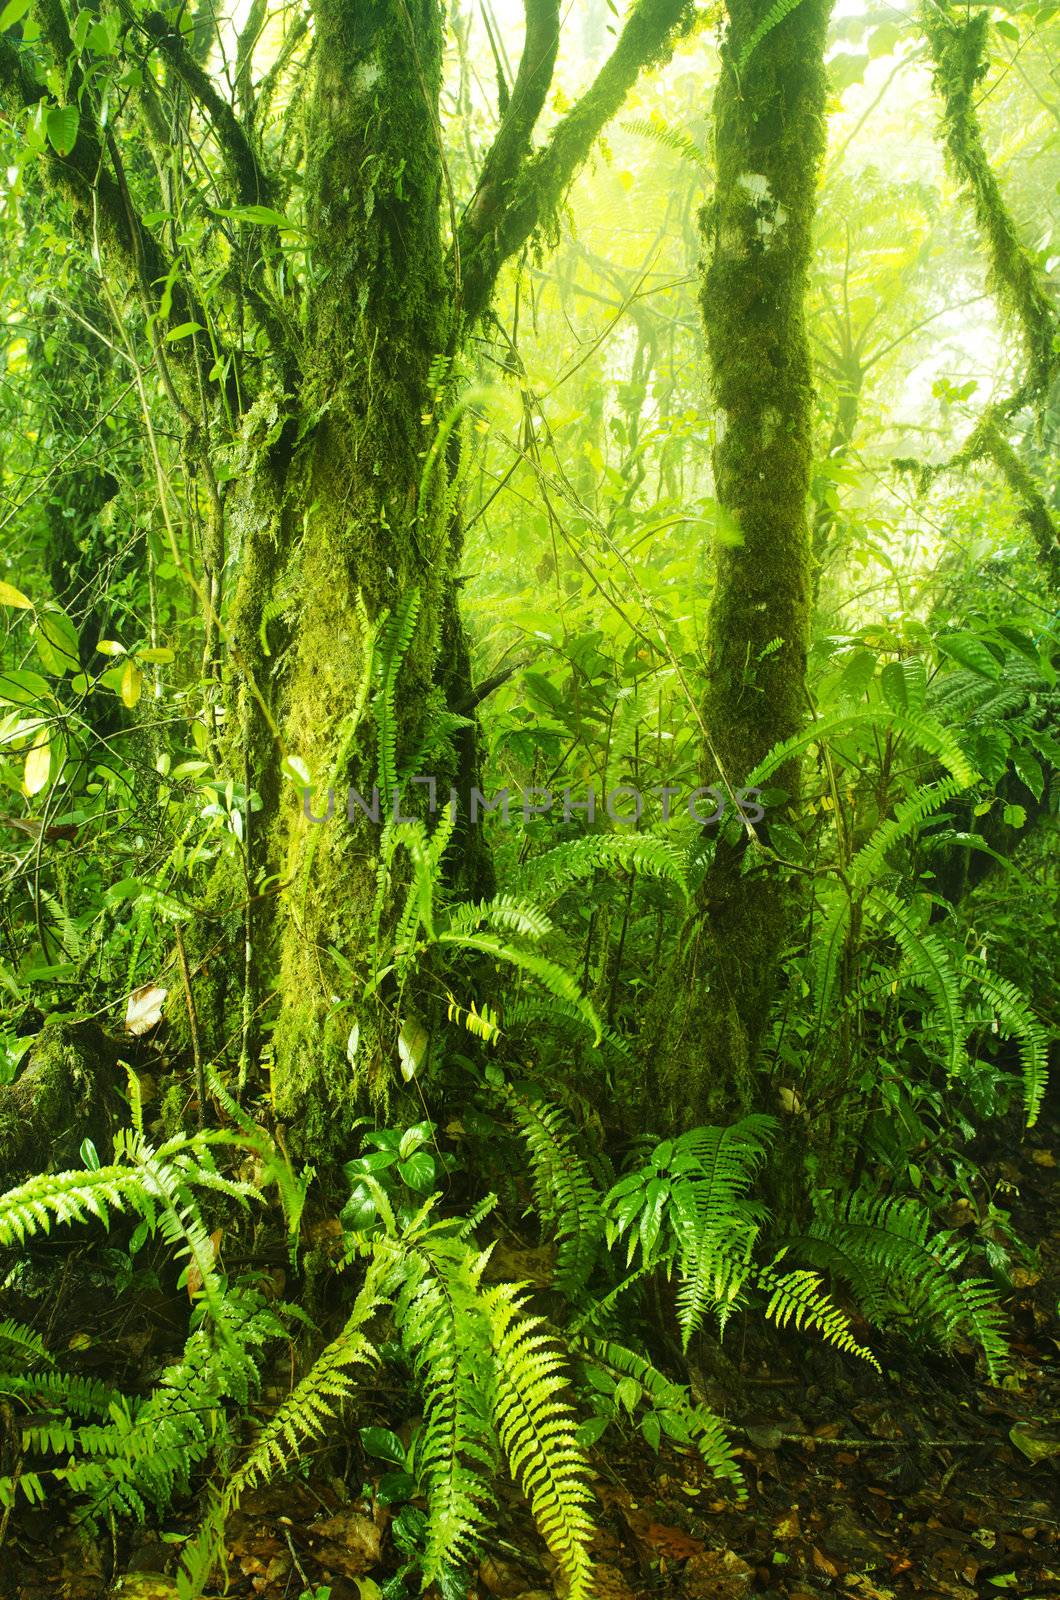 Mossy forest, cameron highlands Malaysia